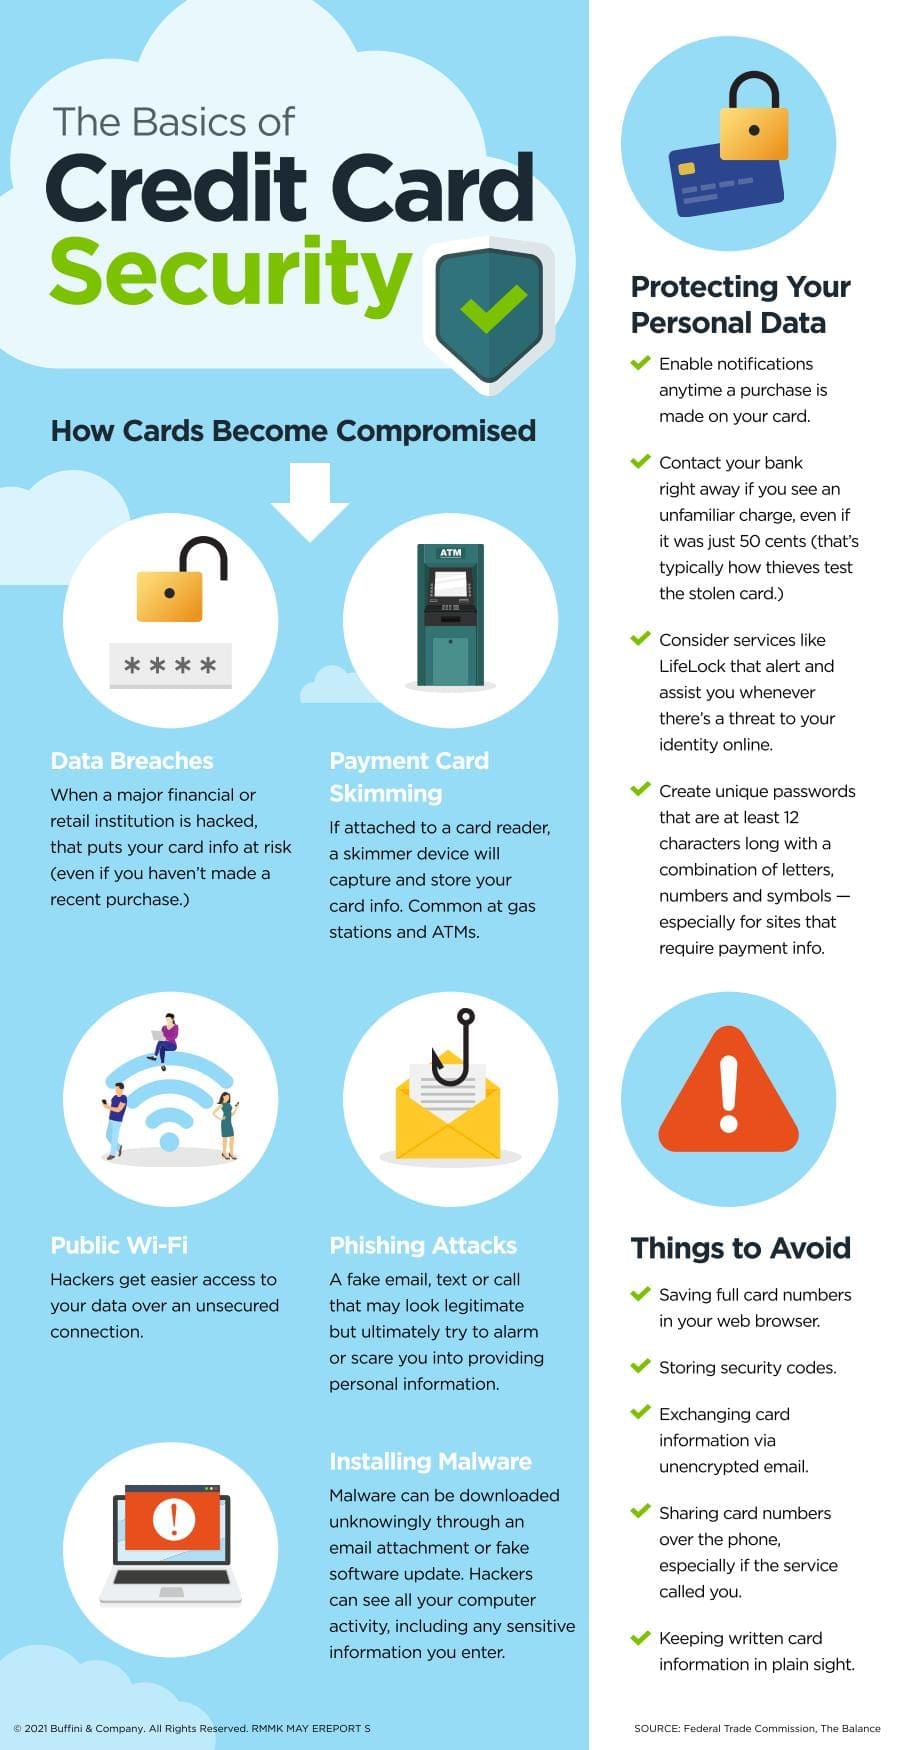 The Basics of Credit Card Security